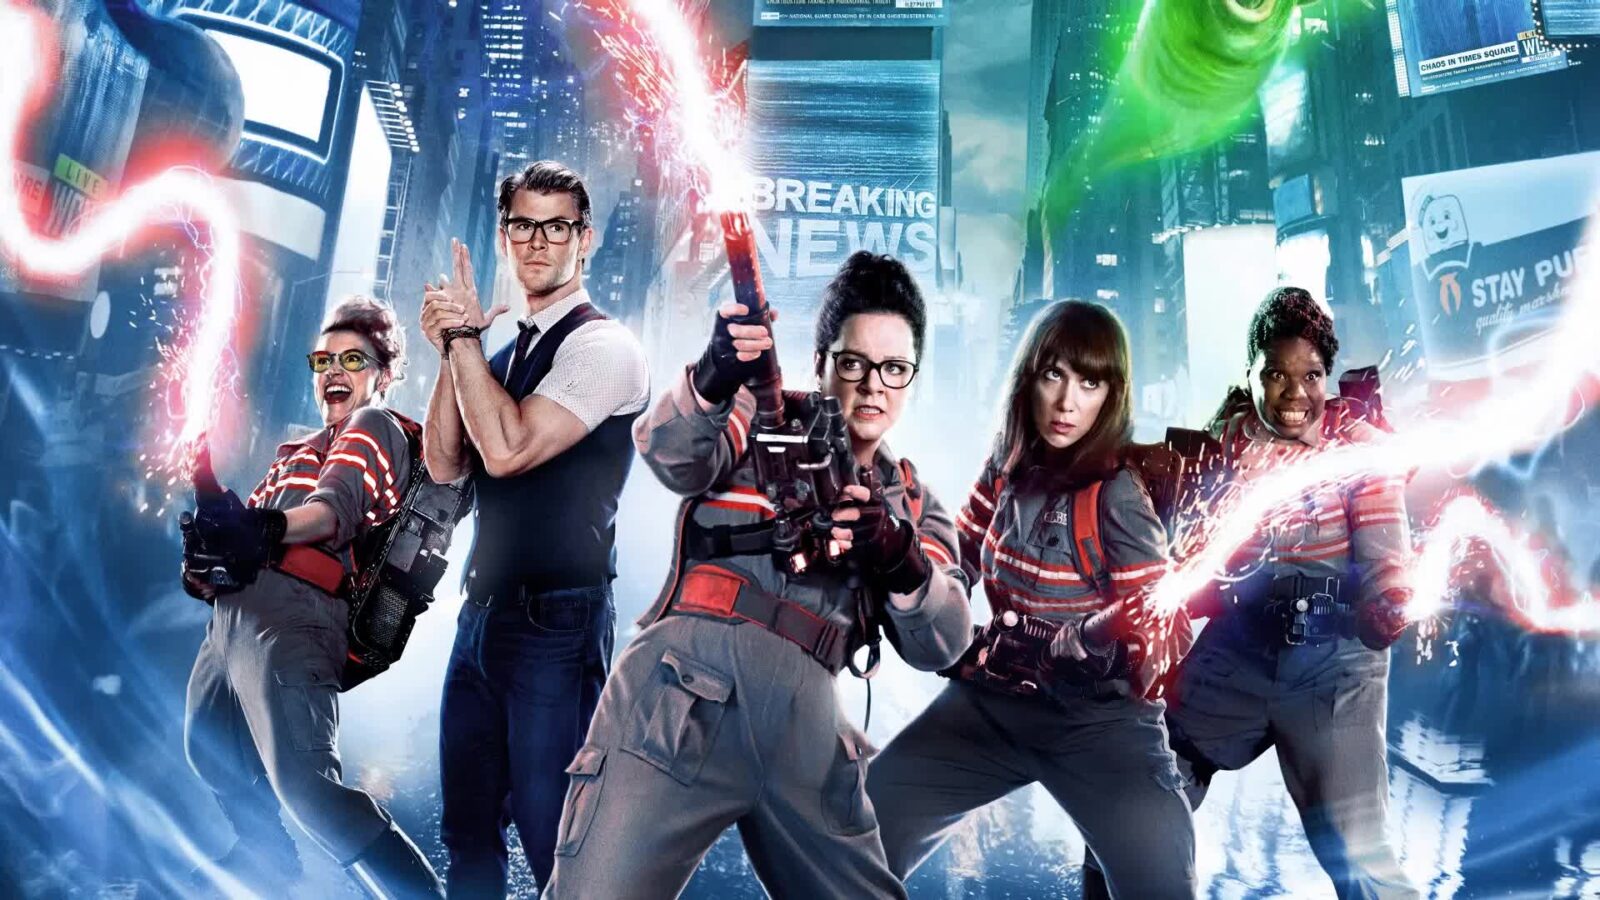 LiveWallpapers4Free.com | Ghostbusters Movies Comedy - Animated Desktop Wallpaper